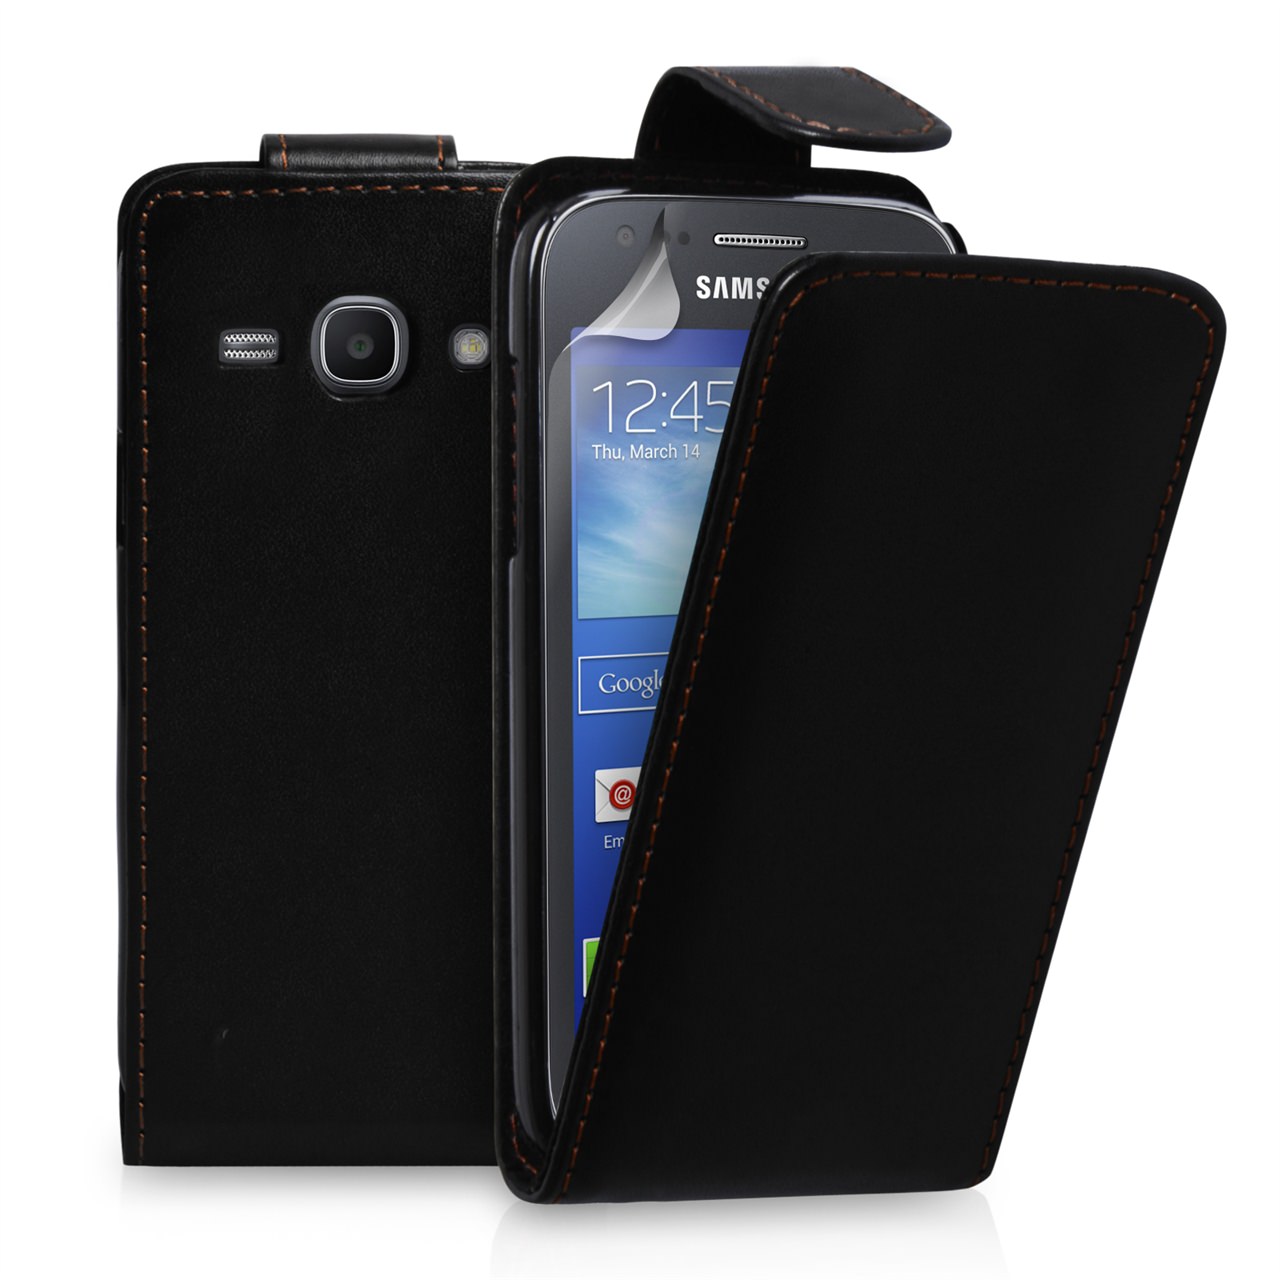 YouSave Samsung Galaxy Ace 3 Leather-Effect Flip Case - Black